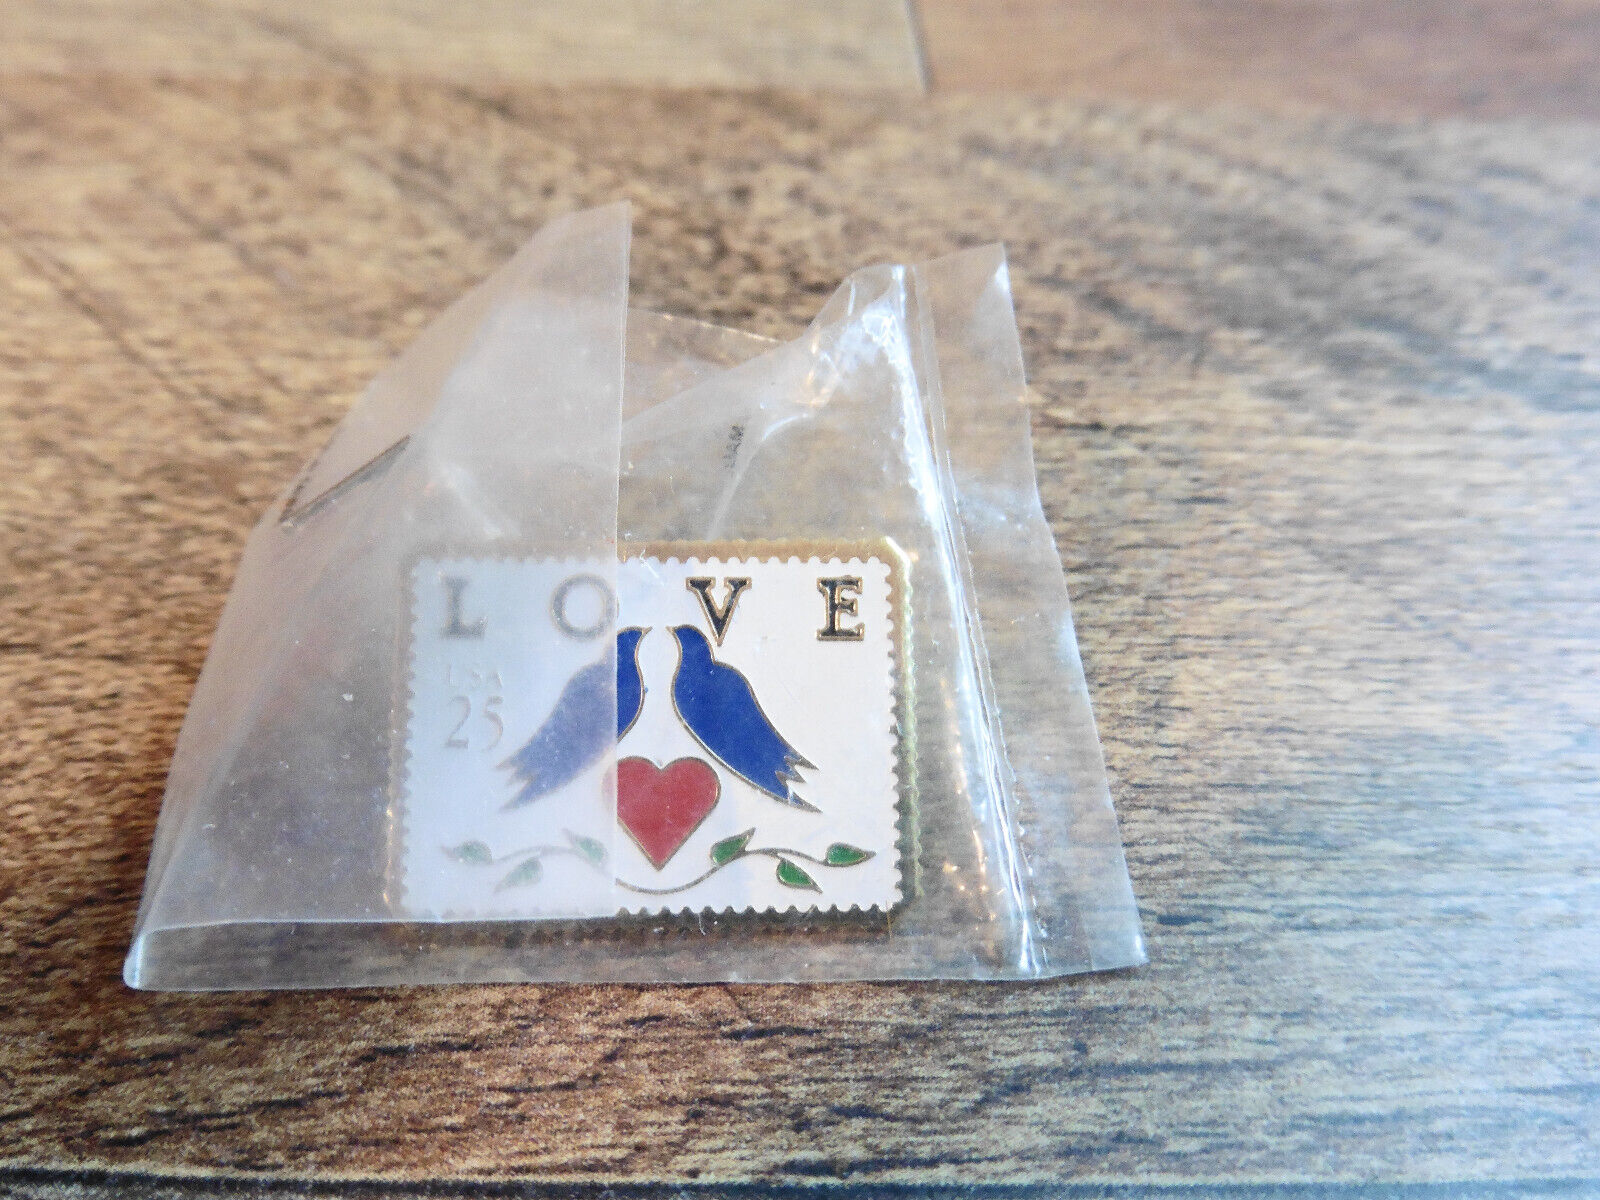 NEW Vintage USPS 1988 Love Bird 25 Cents Stamp Enamel Lapel Pin US Mail